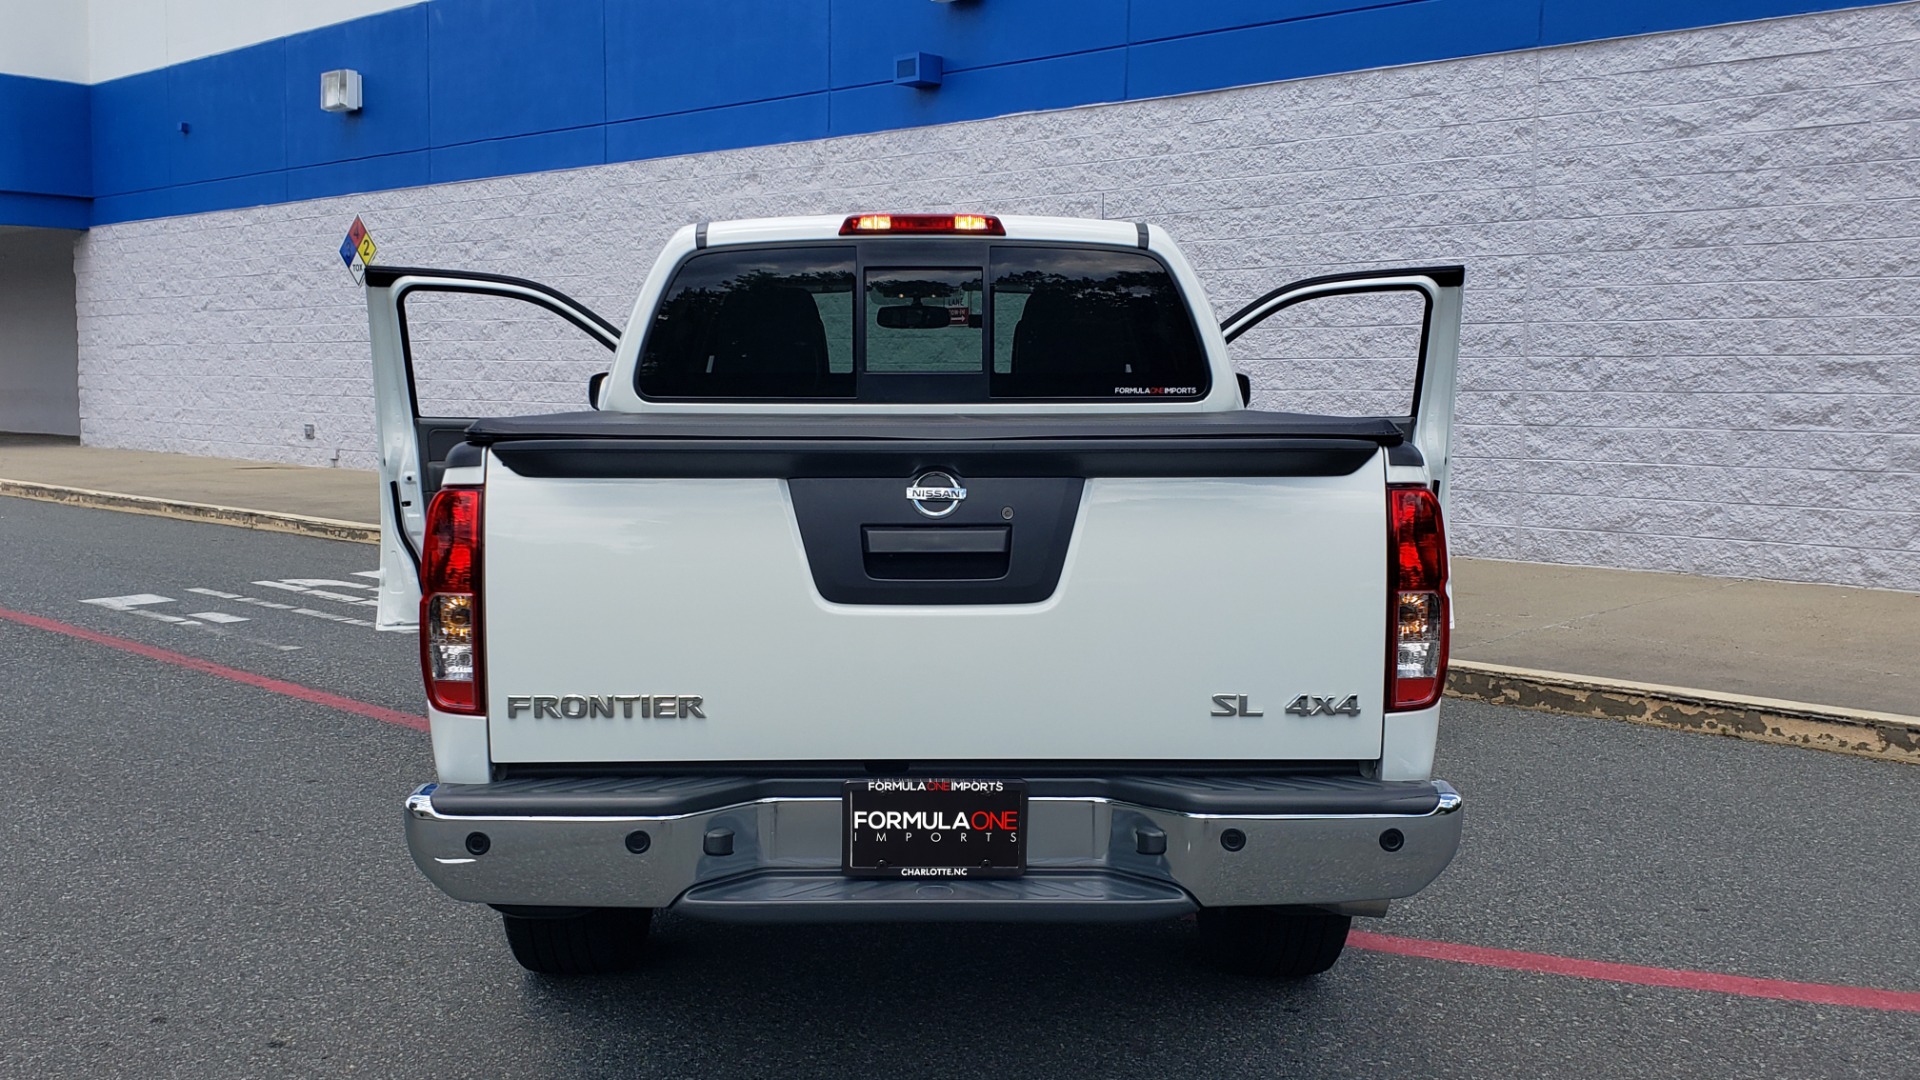 Used 2019 Nissan FRONTIER SL CREW CAB / 4X4 / NAV / SUNROOF / ROCKFORD FOSGATE / LOADED for sale Sold at Formula Imports in Charlotte NC 28227 28